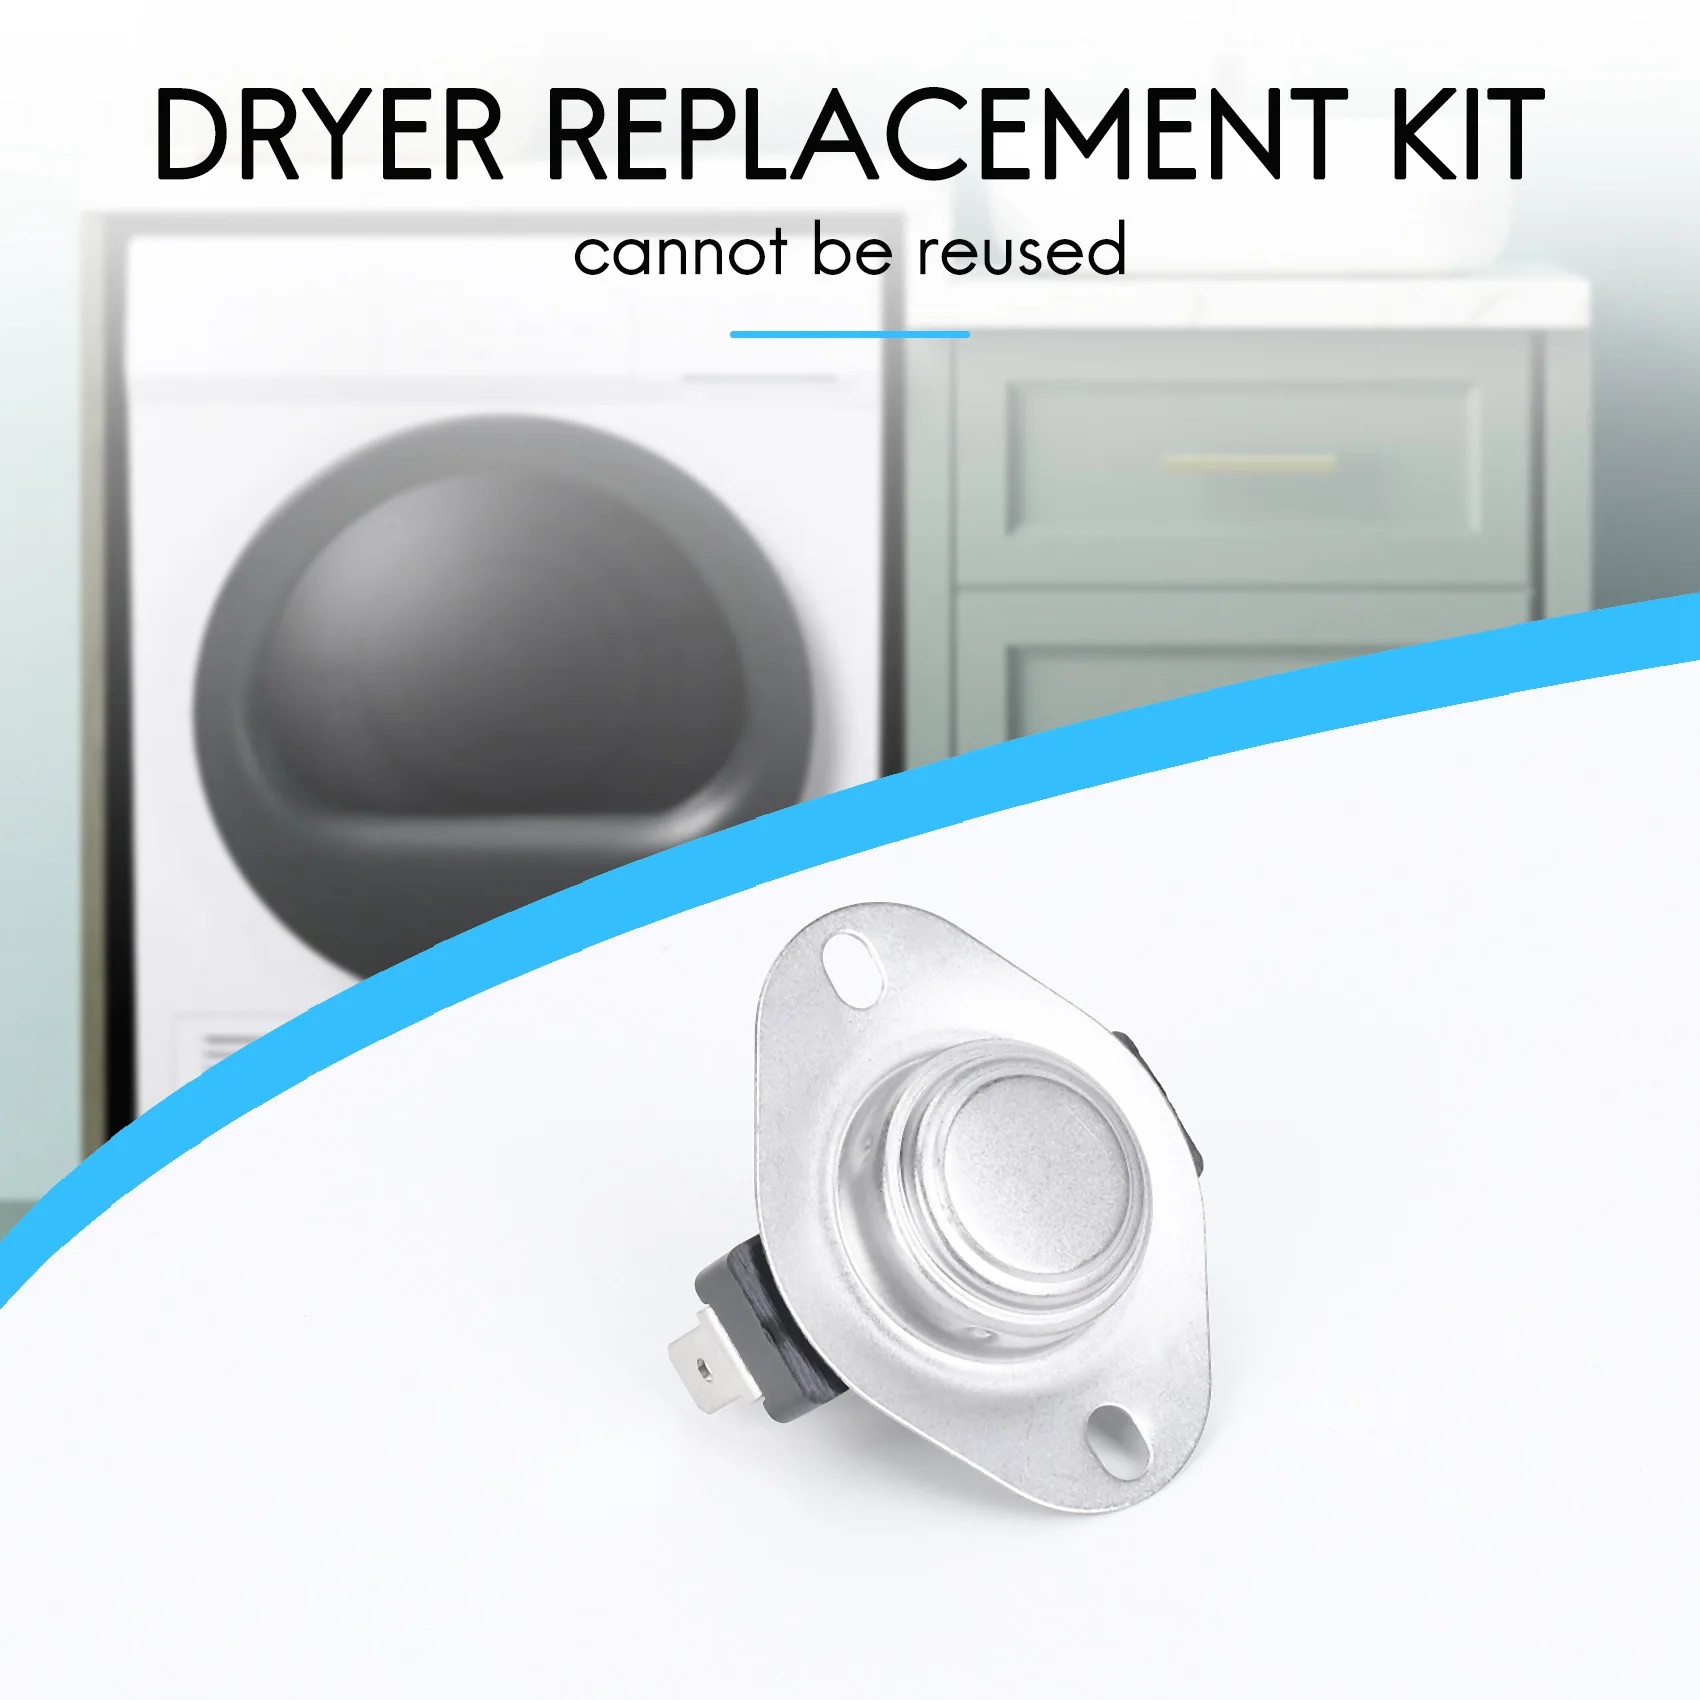 Dryer Replacement Kit 3387134 High-Limit Thermostat 3392519 Dryer Thermal Fuse 3977393 Thermal Cut-Off Switch 3977767 Cycling Th